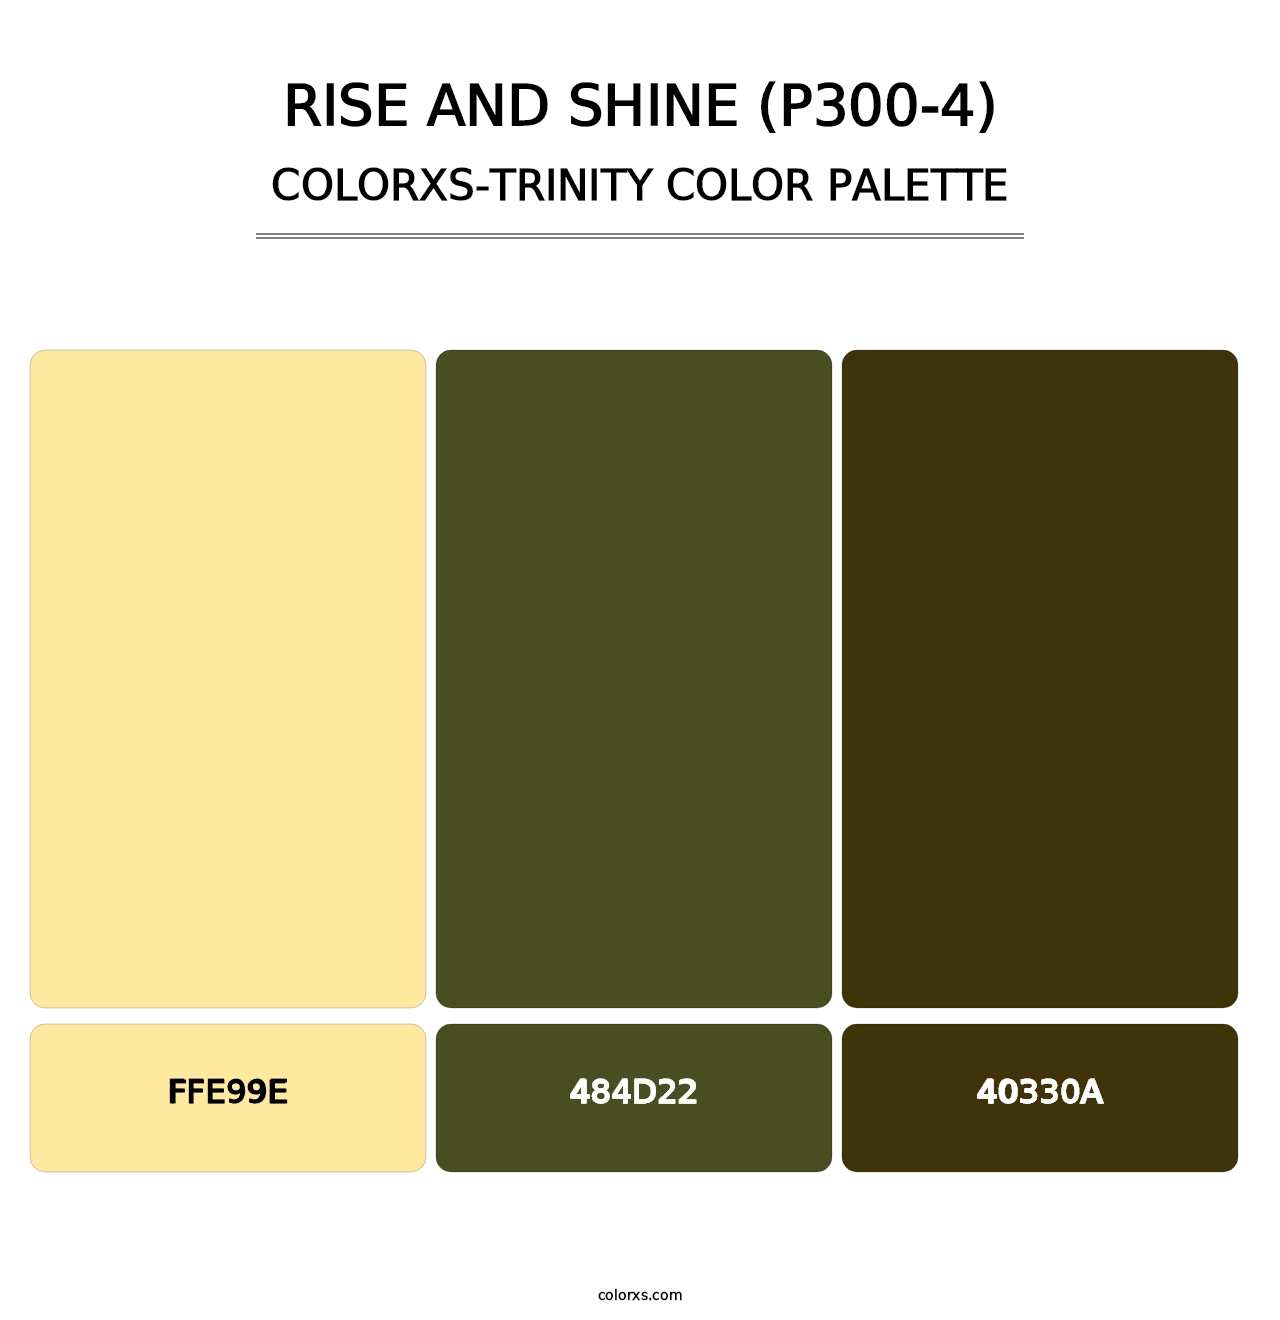 Rise And Shine (P300-4) - Colorxs Trinity Palette